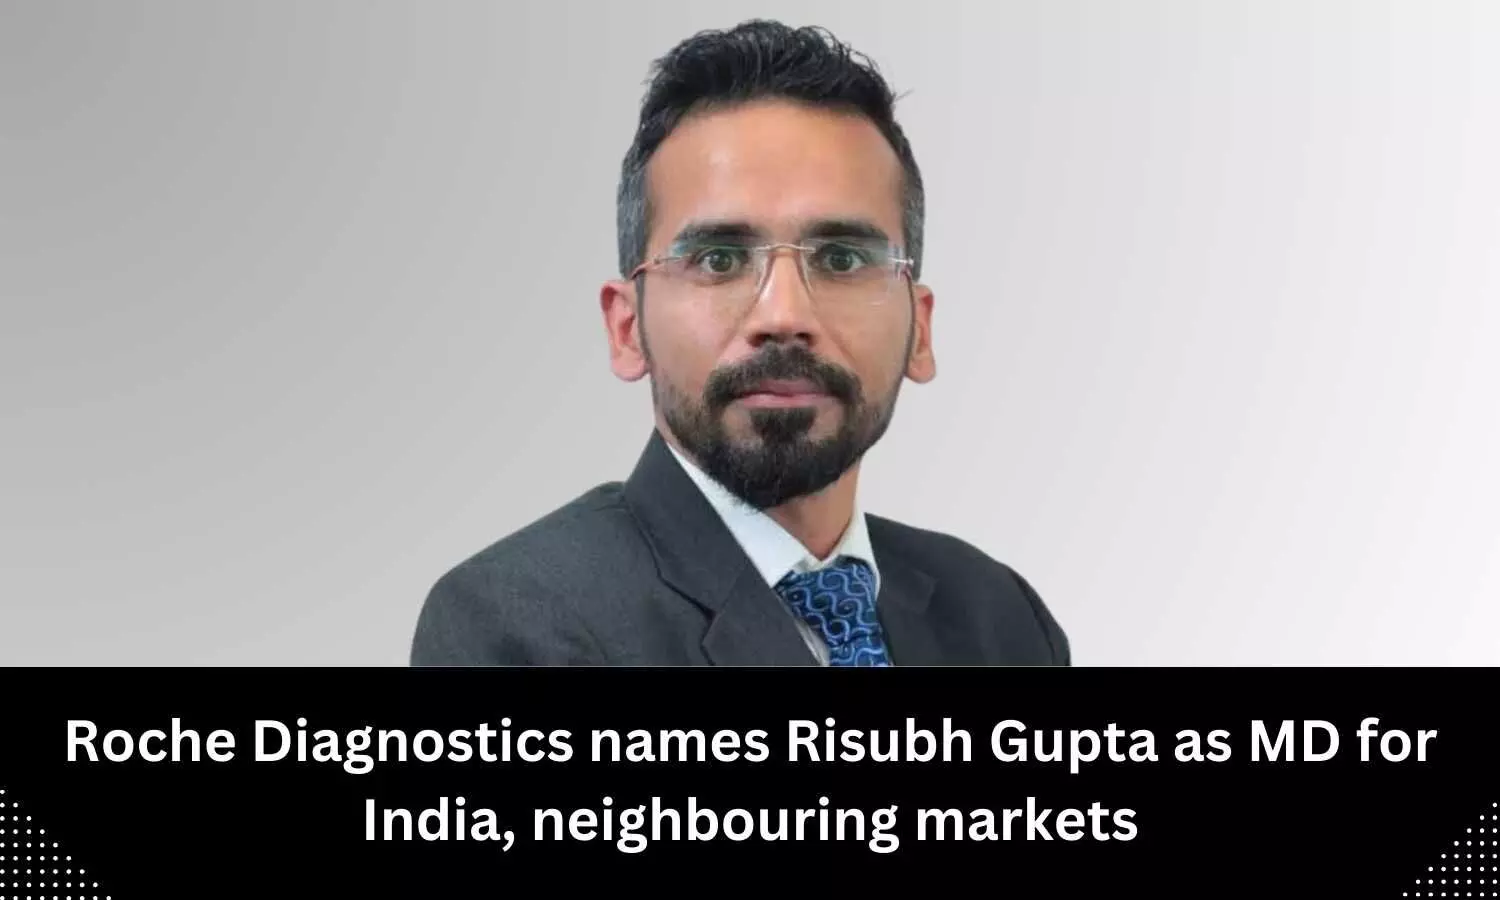 Rishubh Gupta joins Roche Diagnostics as MD for India, neighbouring markets